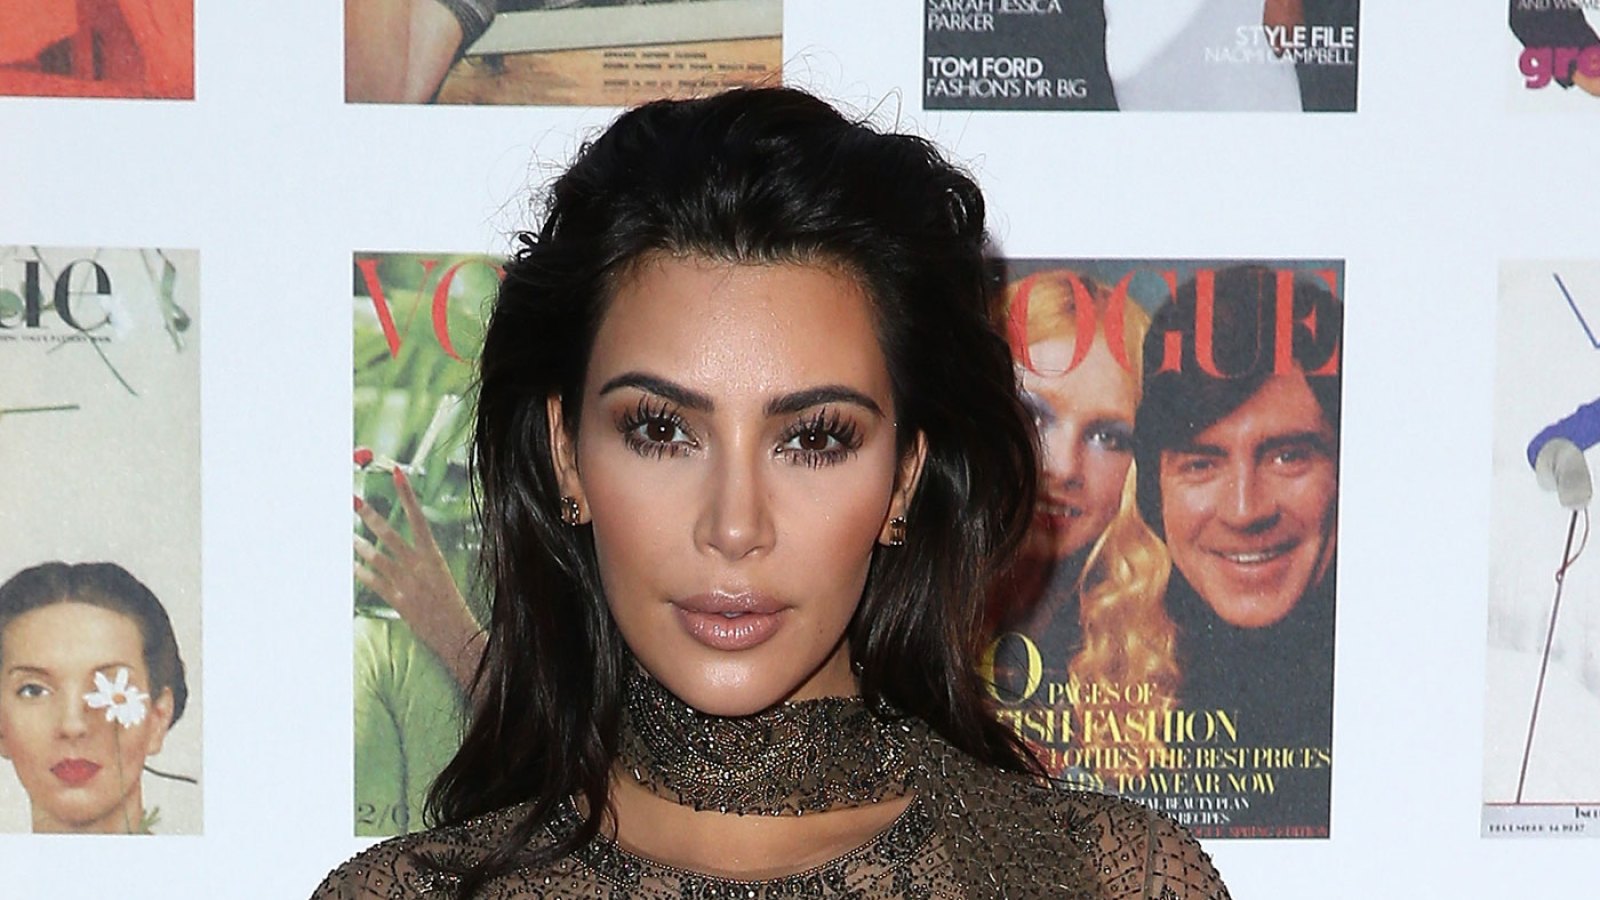 Kim Kardashian has shared a raunchy selfie in honor of National Selfie Day